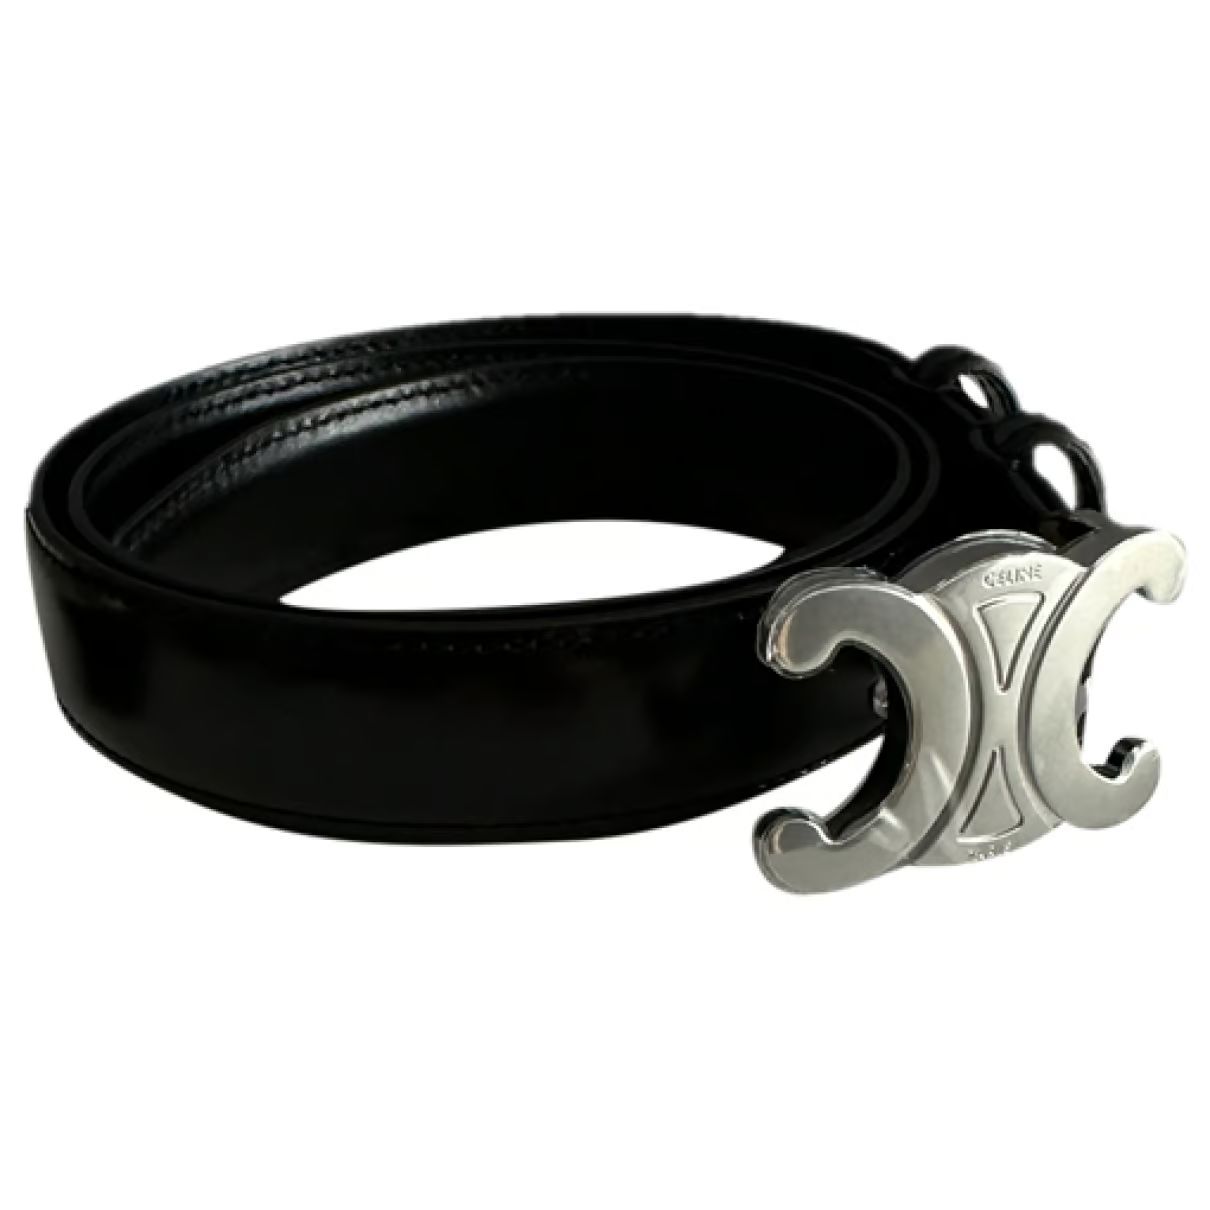 Triomphe leather belt Celine Black size 75 cm in Leather - 36713751 | Vestiaire Collective (Global)